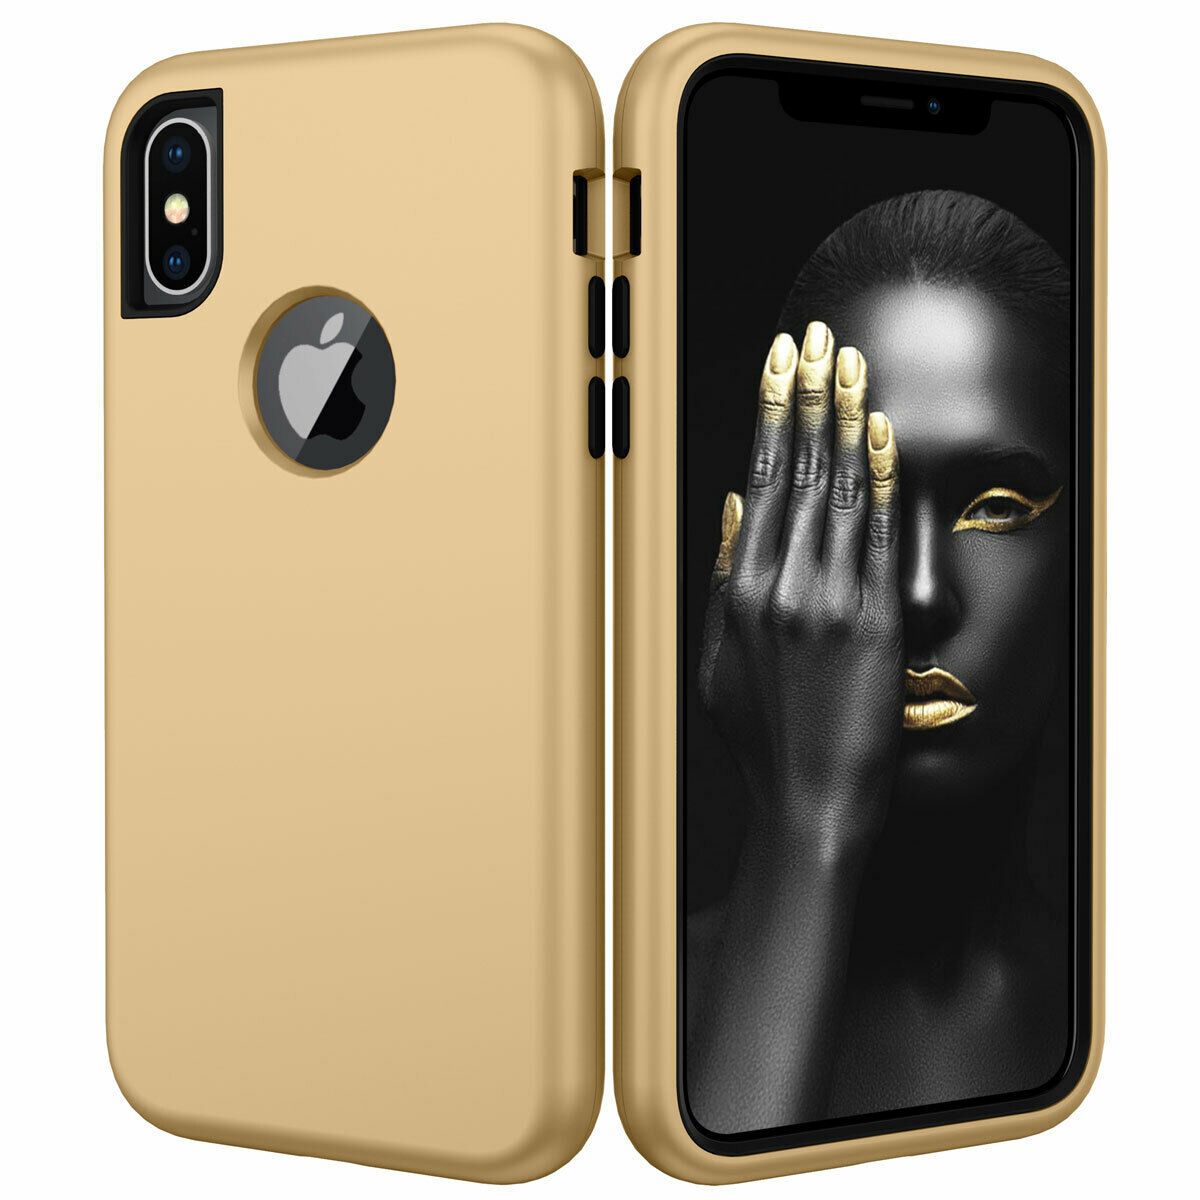 Case For iPhone X Xr XS Max 6 7 8 Plus Shockproof 360 Full Body Cover Protective detsarah Gold For iPhone Xs Max 